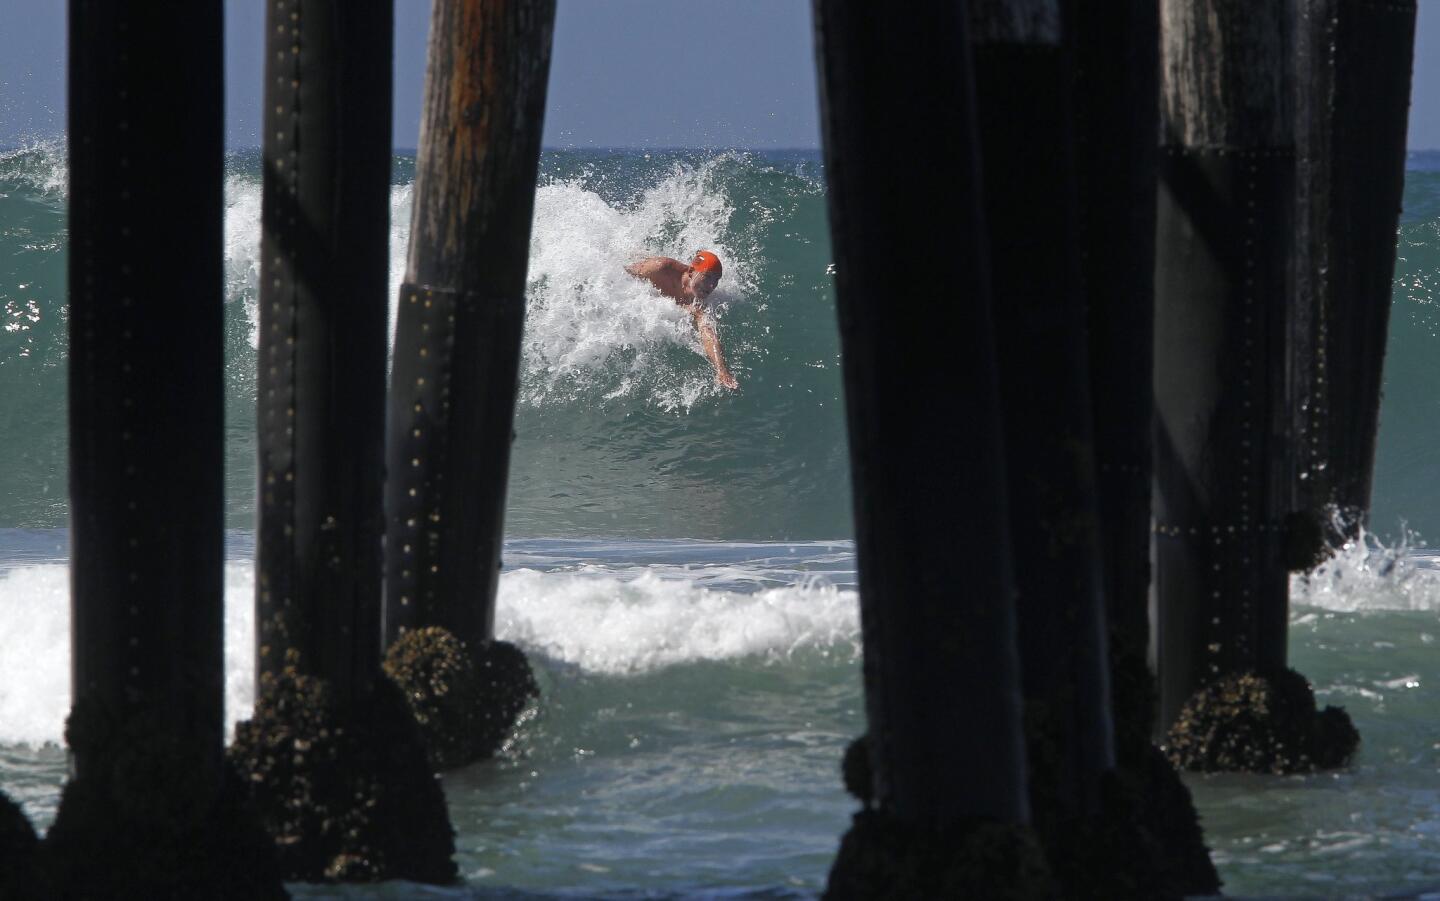 A contestant rides a wave next to the Oceanside Pier during the 38th annual World Bodysurfing Championships held in Oceanside on Saturday, August 16, 2014.